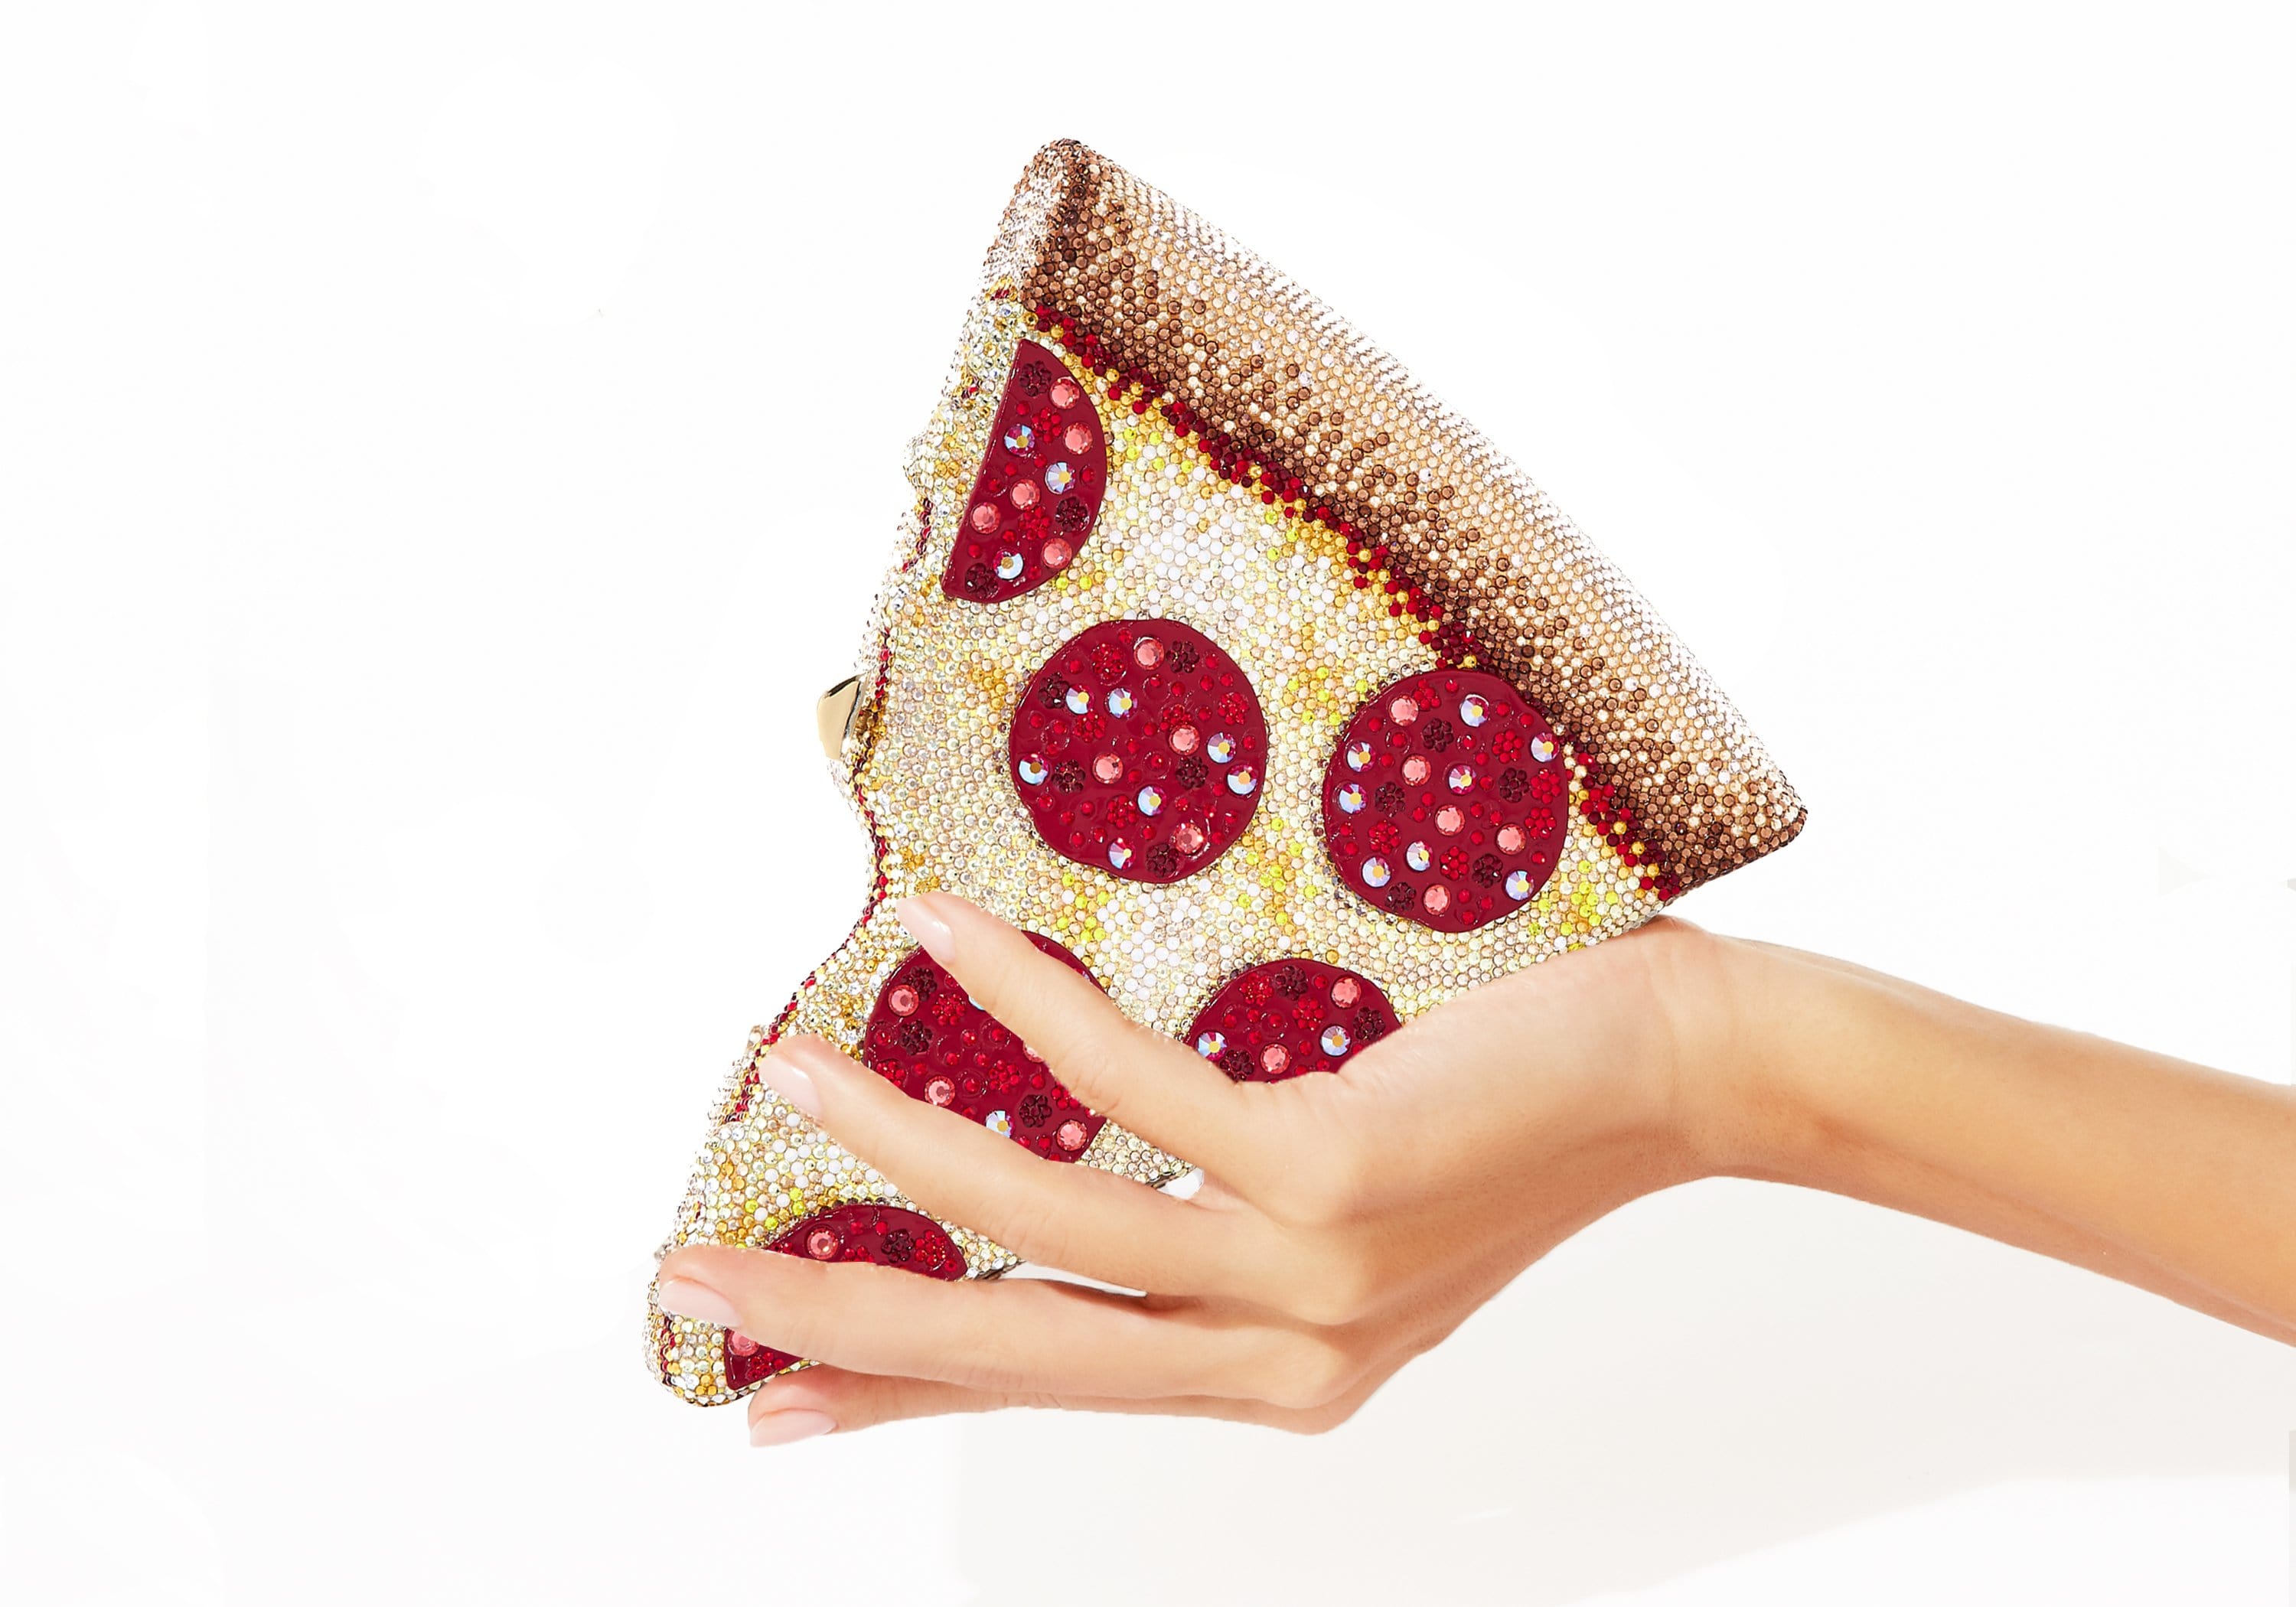 Judith Leiber Pepperoni Pizza Crystal Clutch Champagne